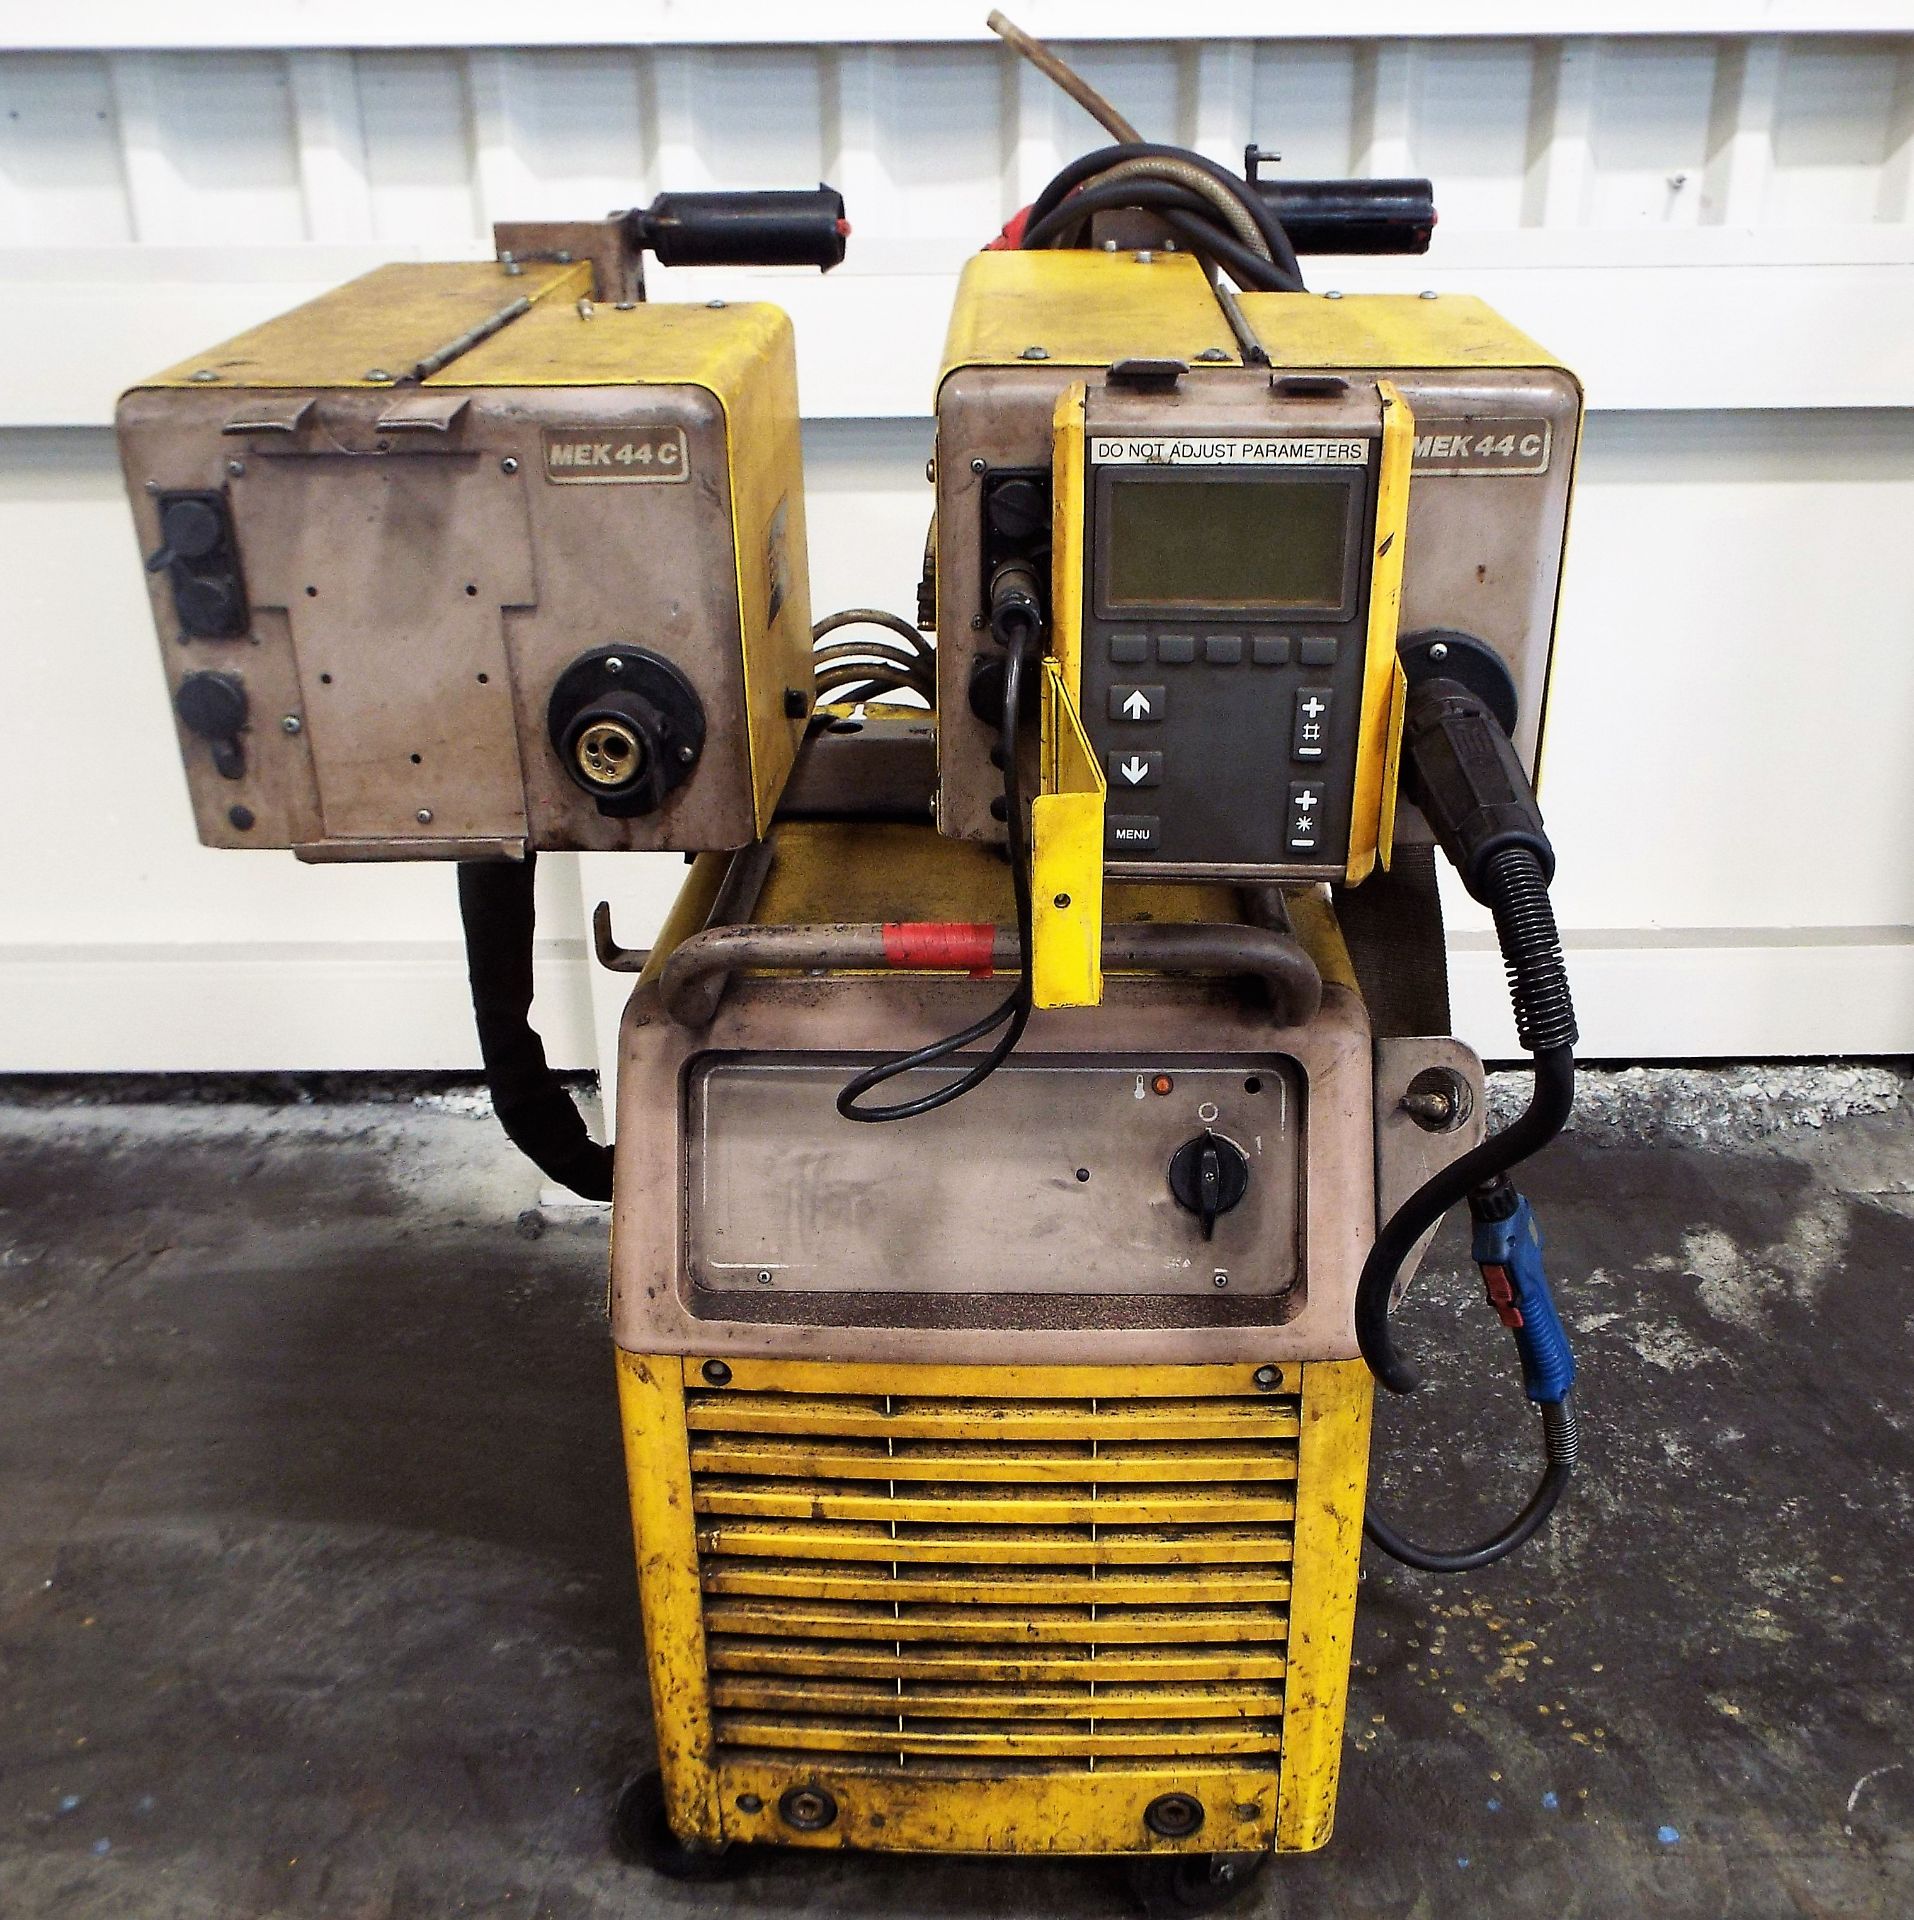 Esab Aristo LUD 450 Portable Welding Set with dual station MEK 44C Wire Feeds & PUA-1 Pendant. - Image 2 of 7